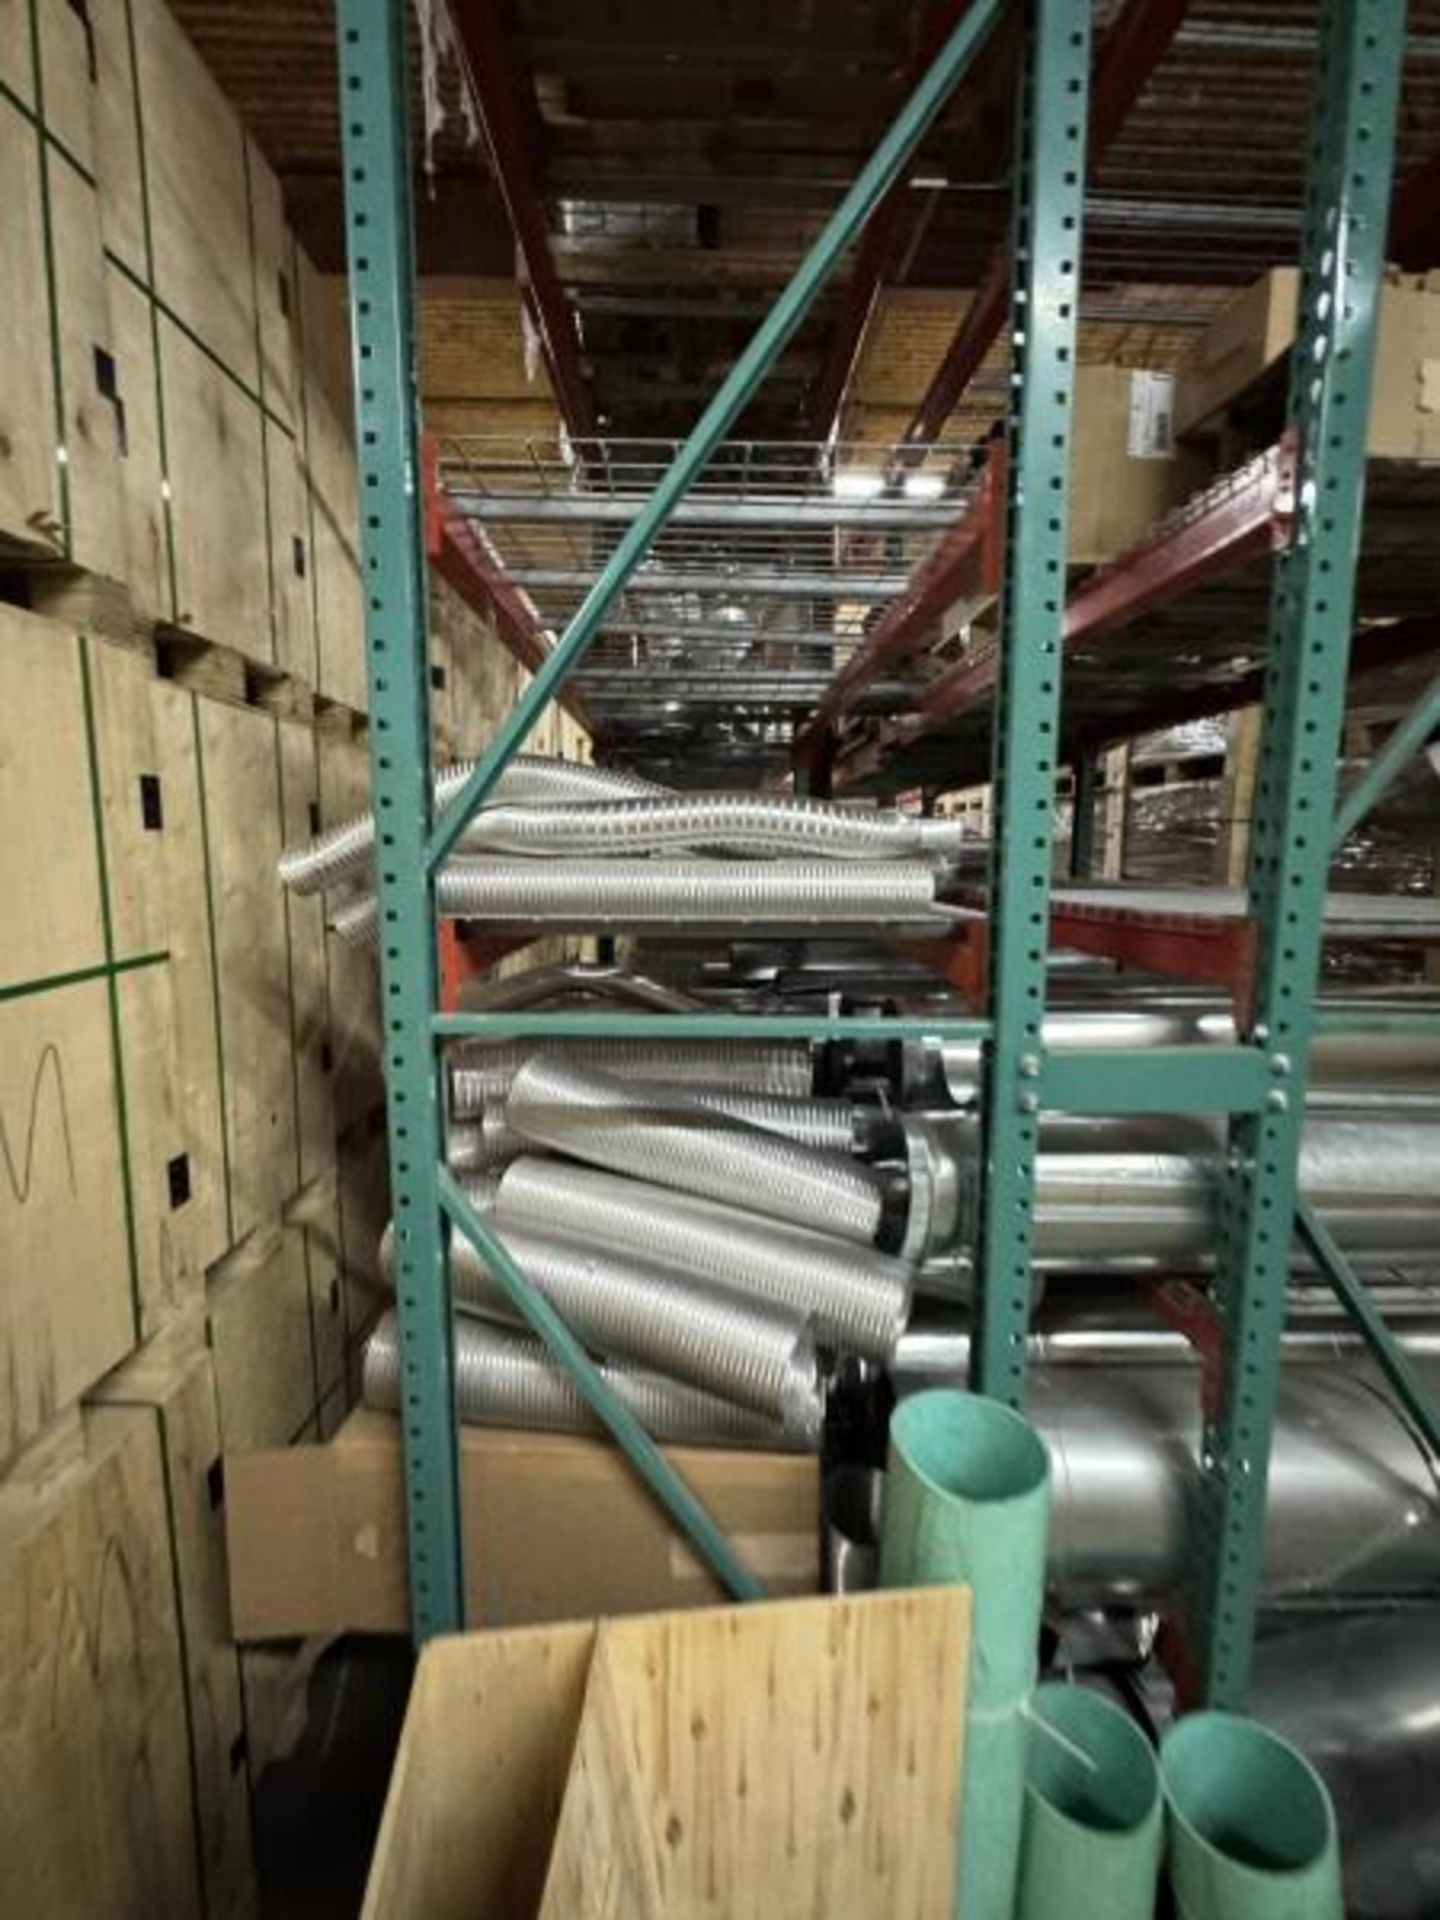 Large Group Lot: Contents of Shelving: Galazined Parts, Liners, Collars, Vent Parts & PVC - Image 7 of 35